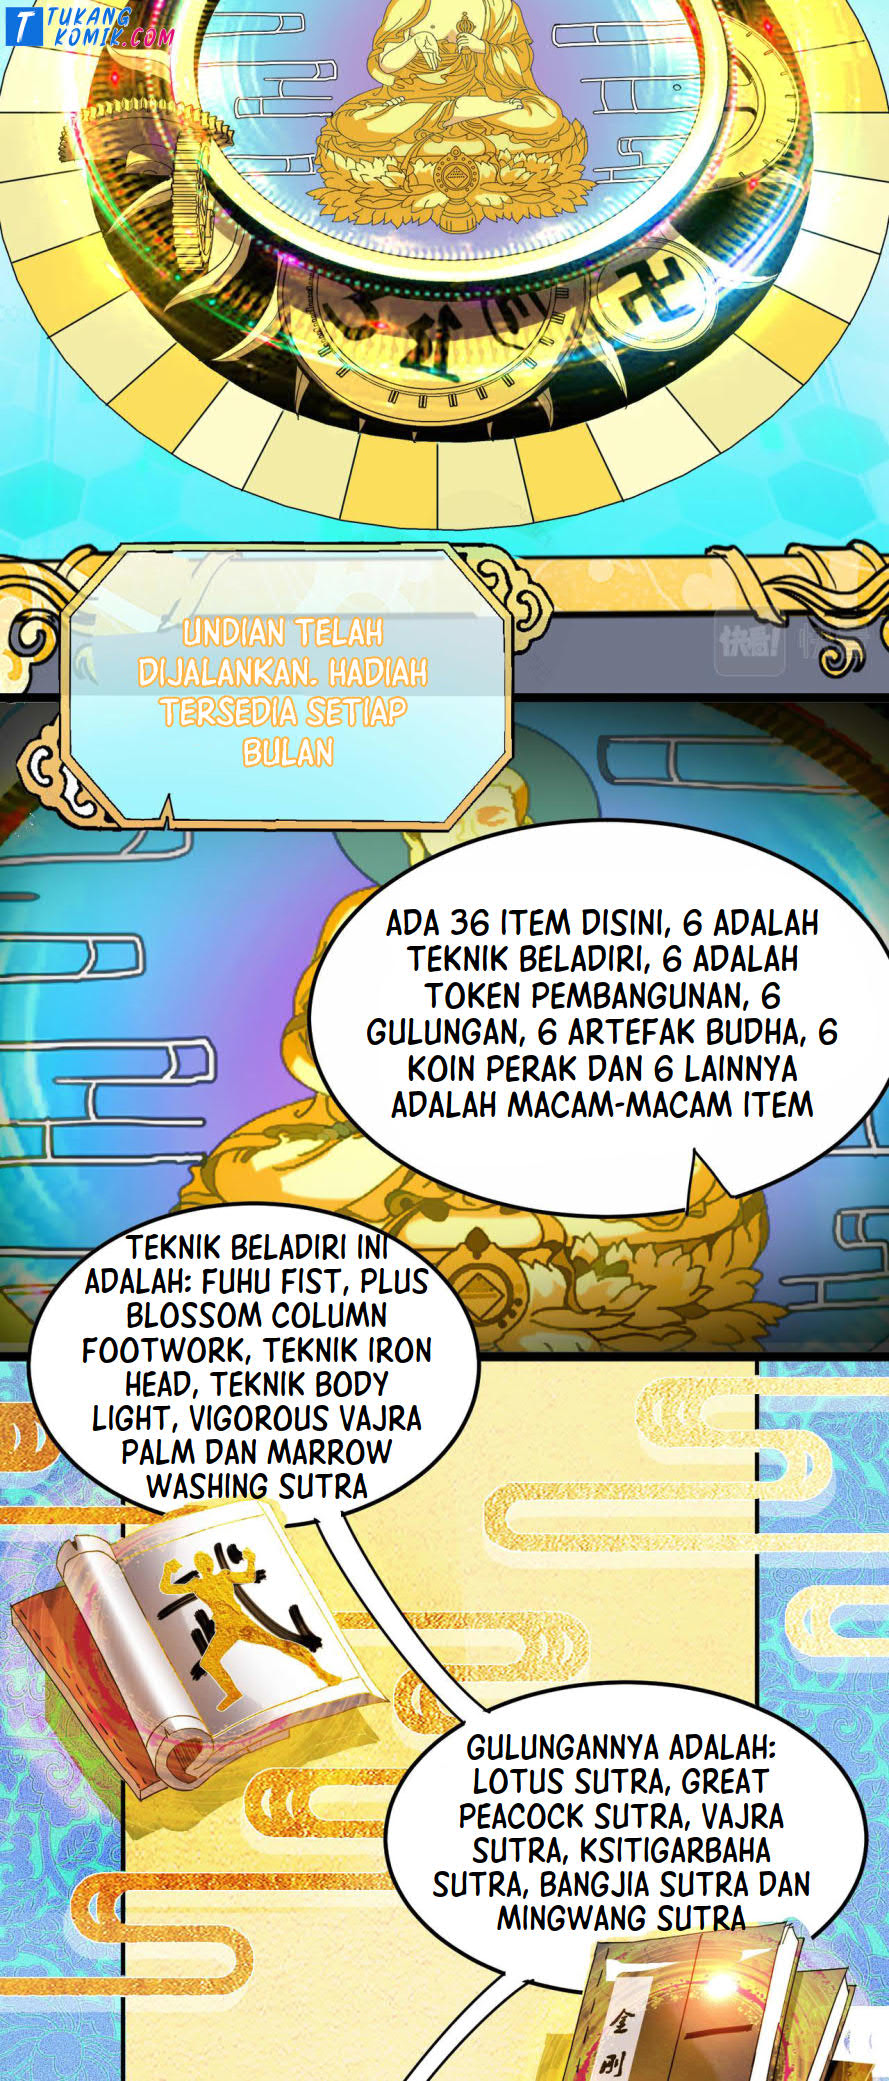 Dilarang COPAS - situs resmi www.mangacanblog.com - Komik building the strongest shaolin temple in another world 003 - chapter 3 4 Indonesia building the strongest shaolin temple in another world 003 - chapter 3 Terbaru 10|Baca Manga Komik Indonesia|Mangacan